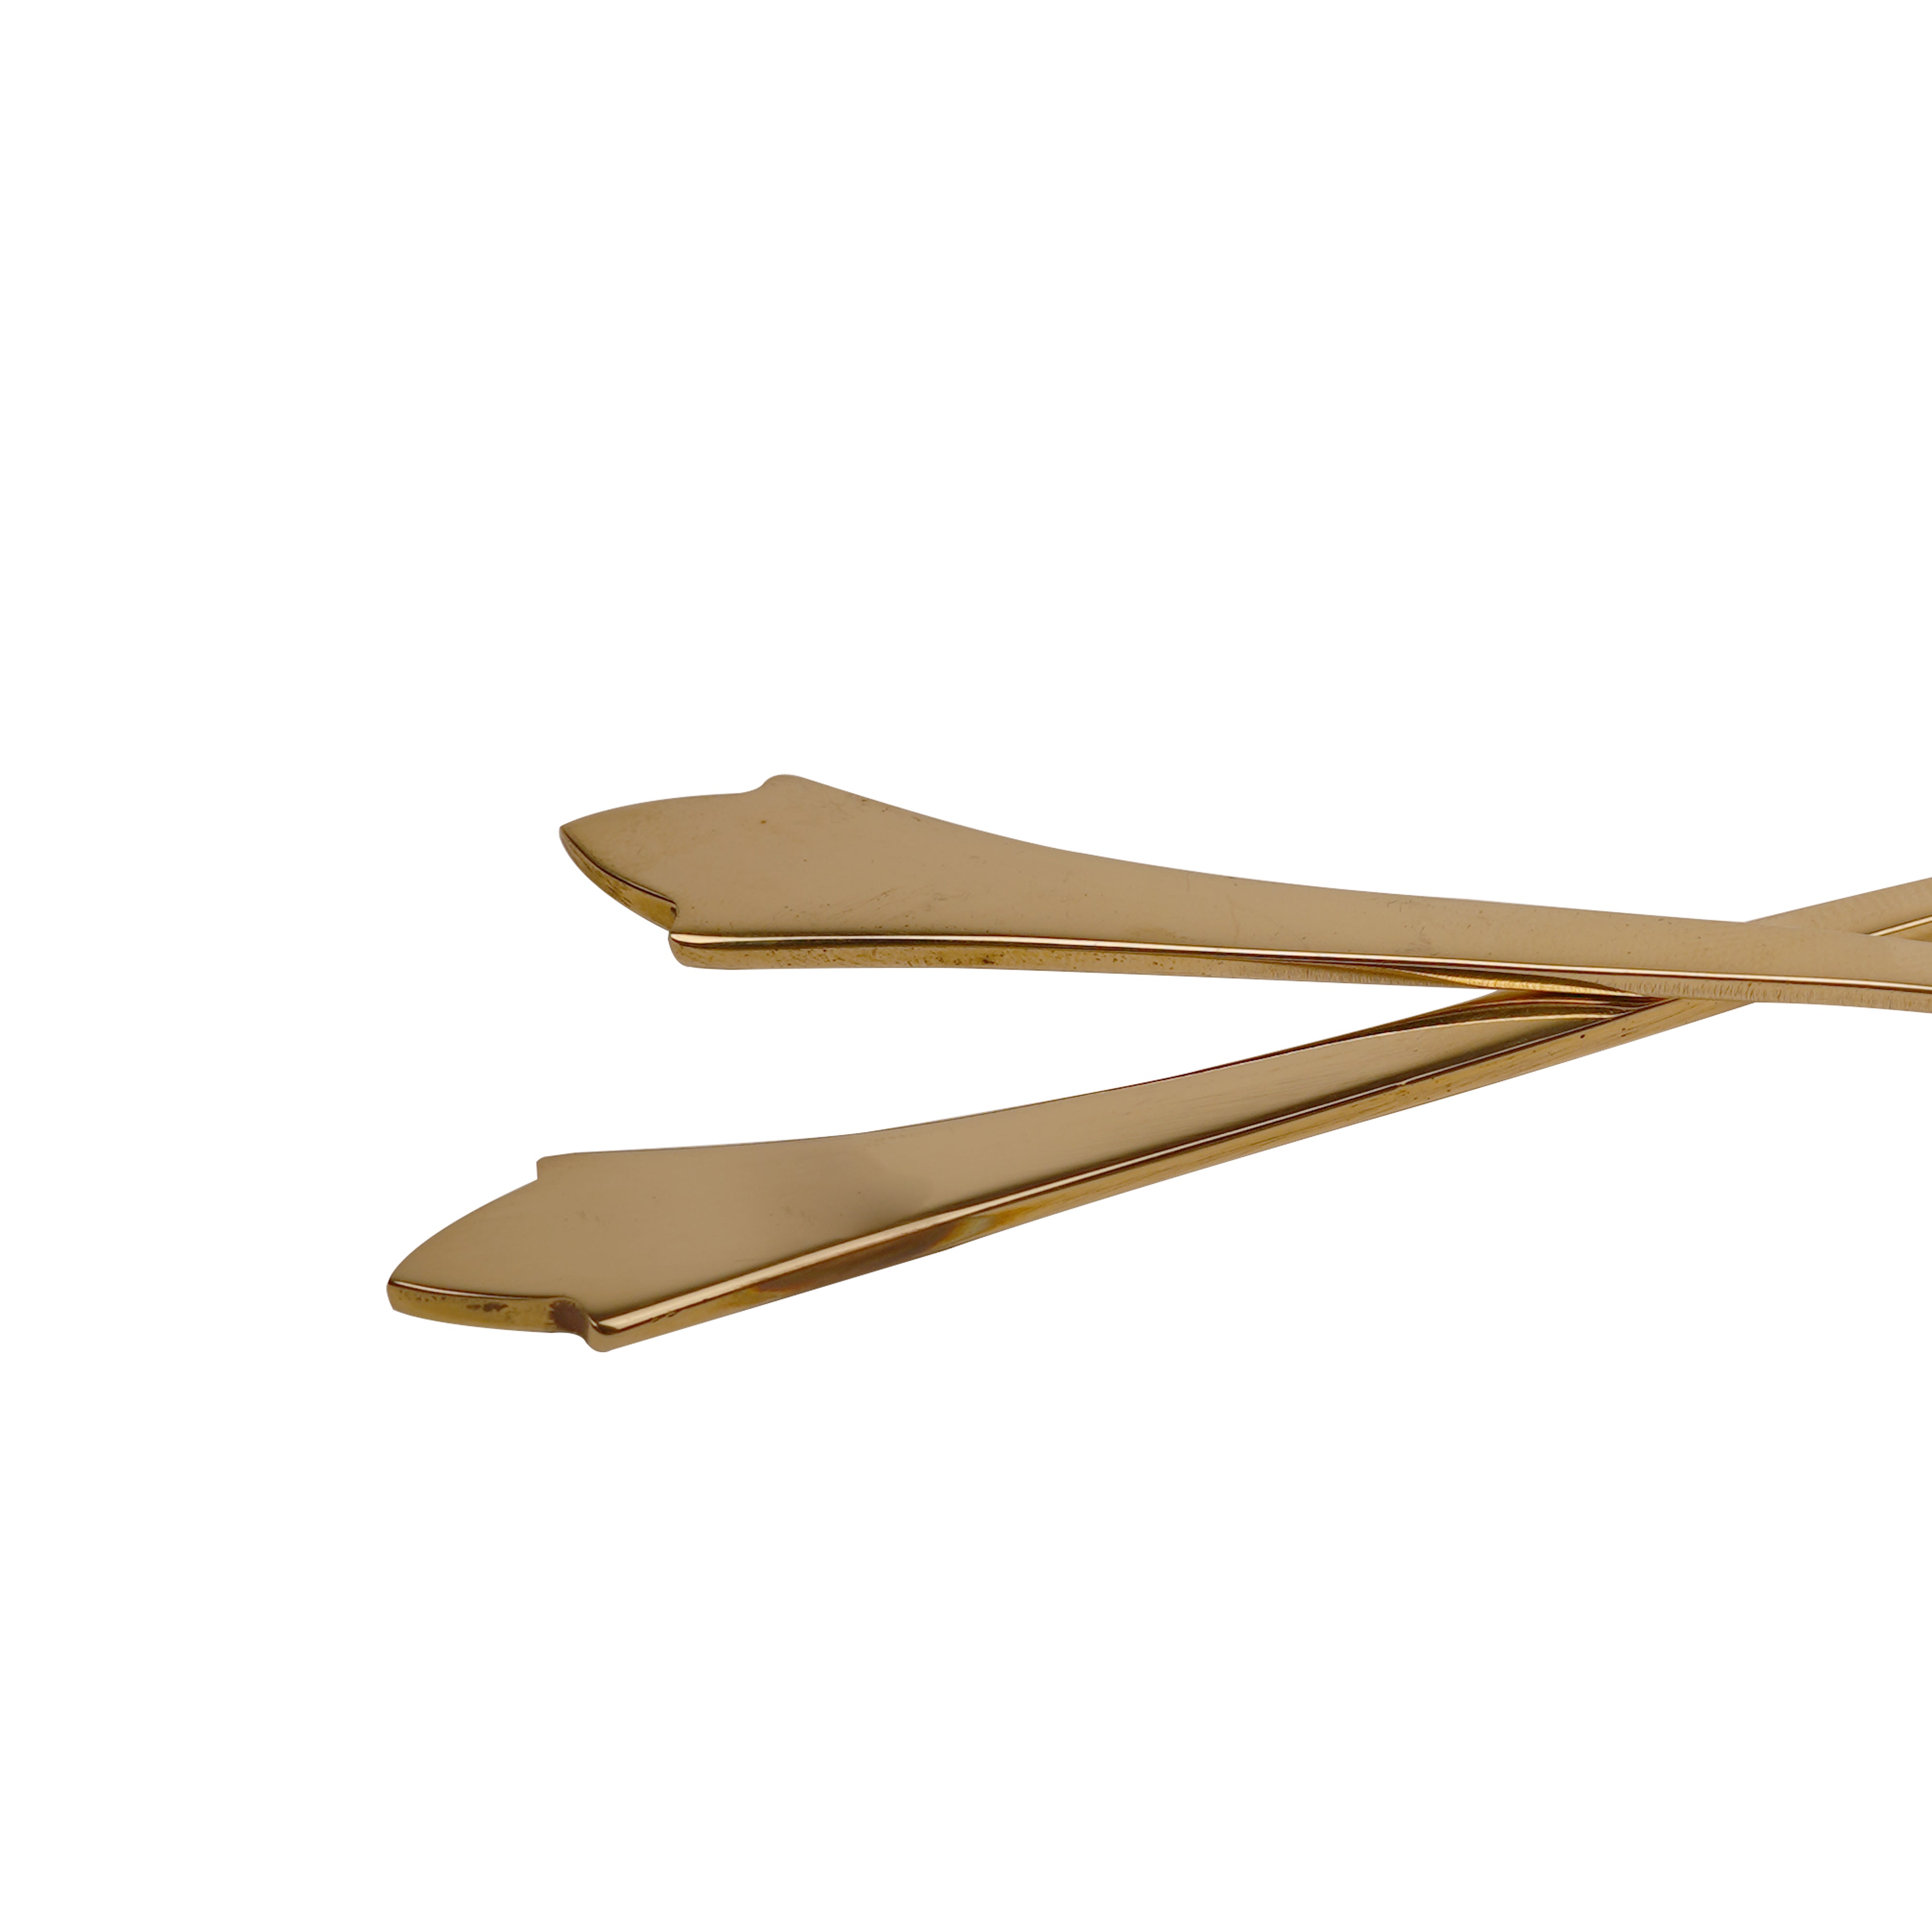 Crescent Spoon and Fork set